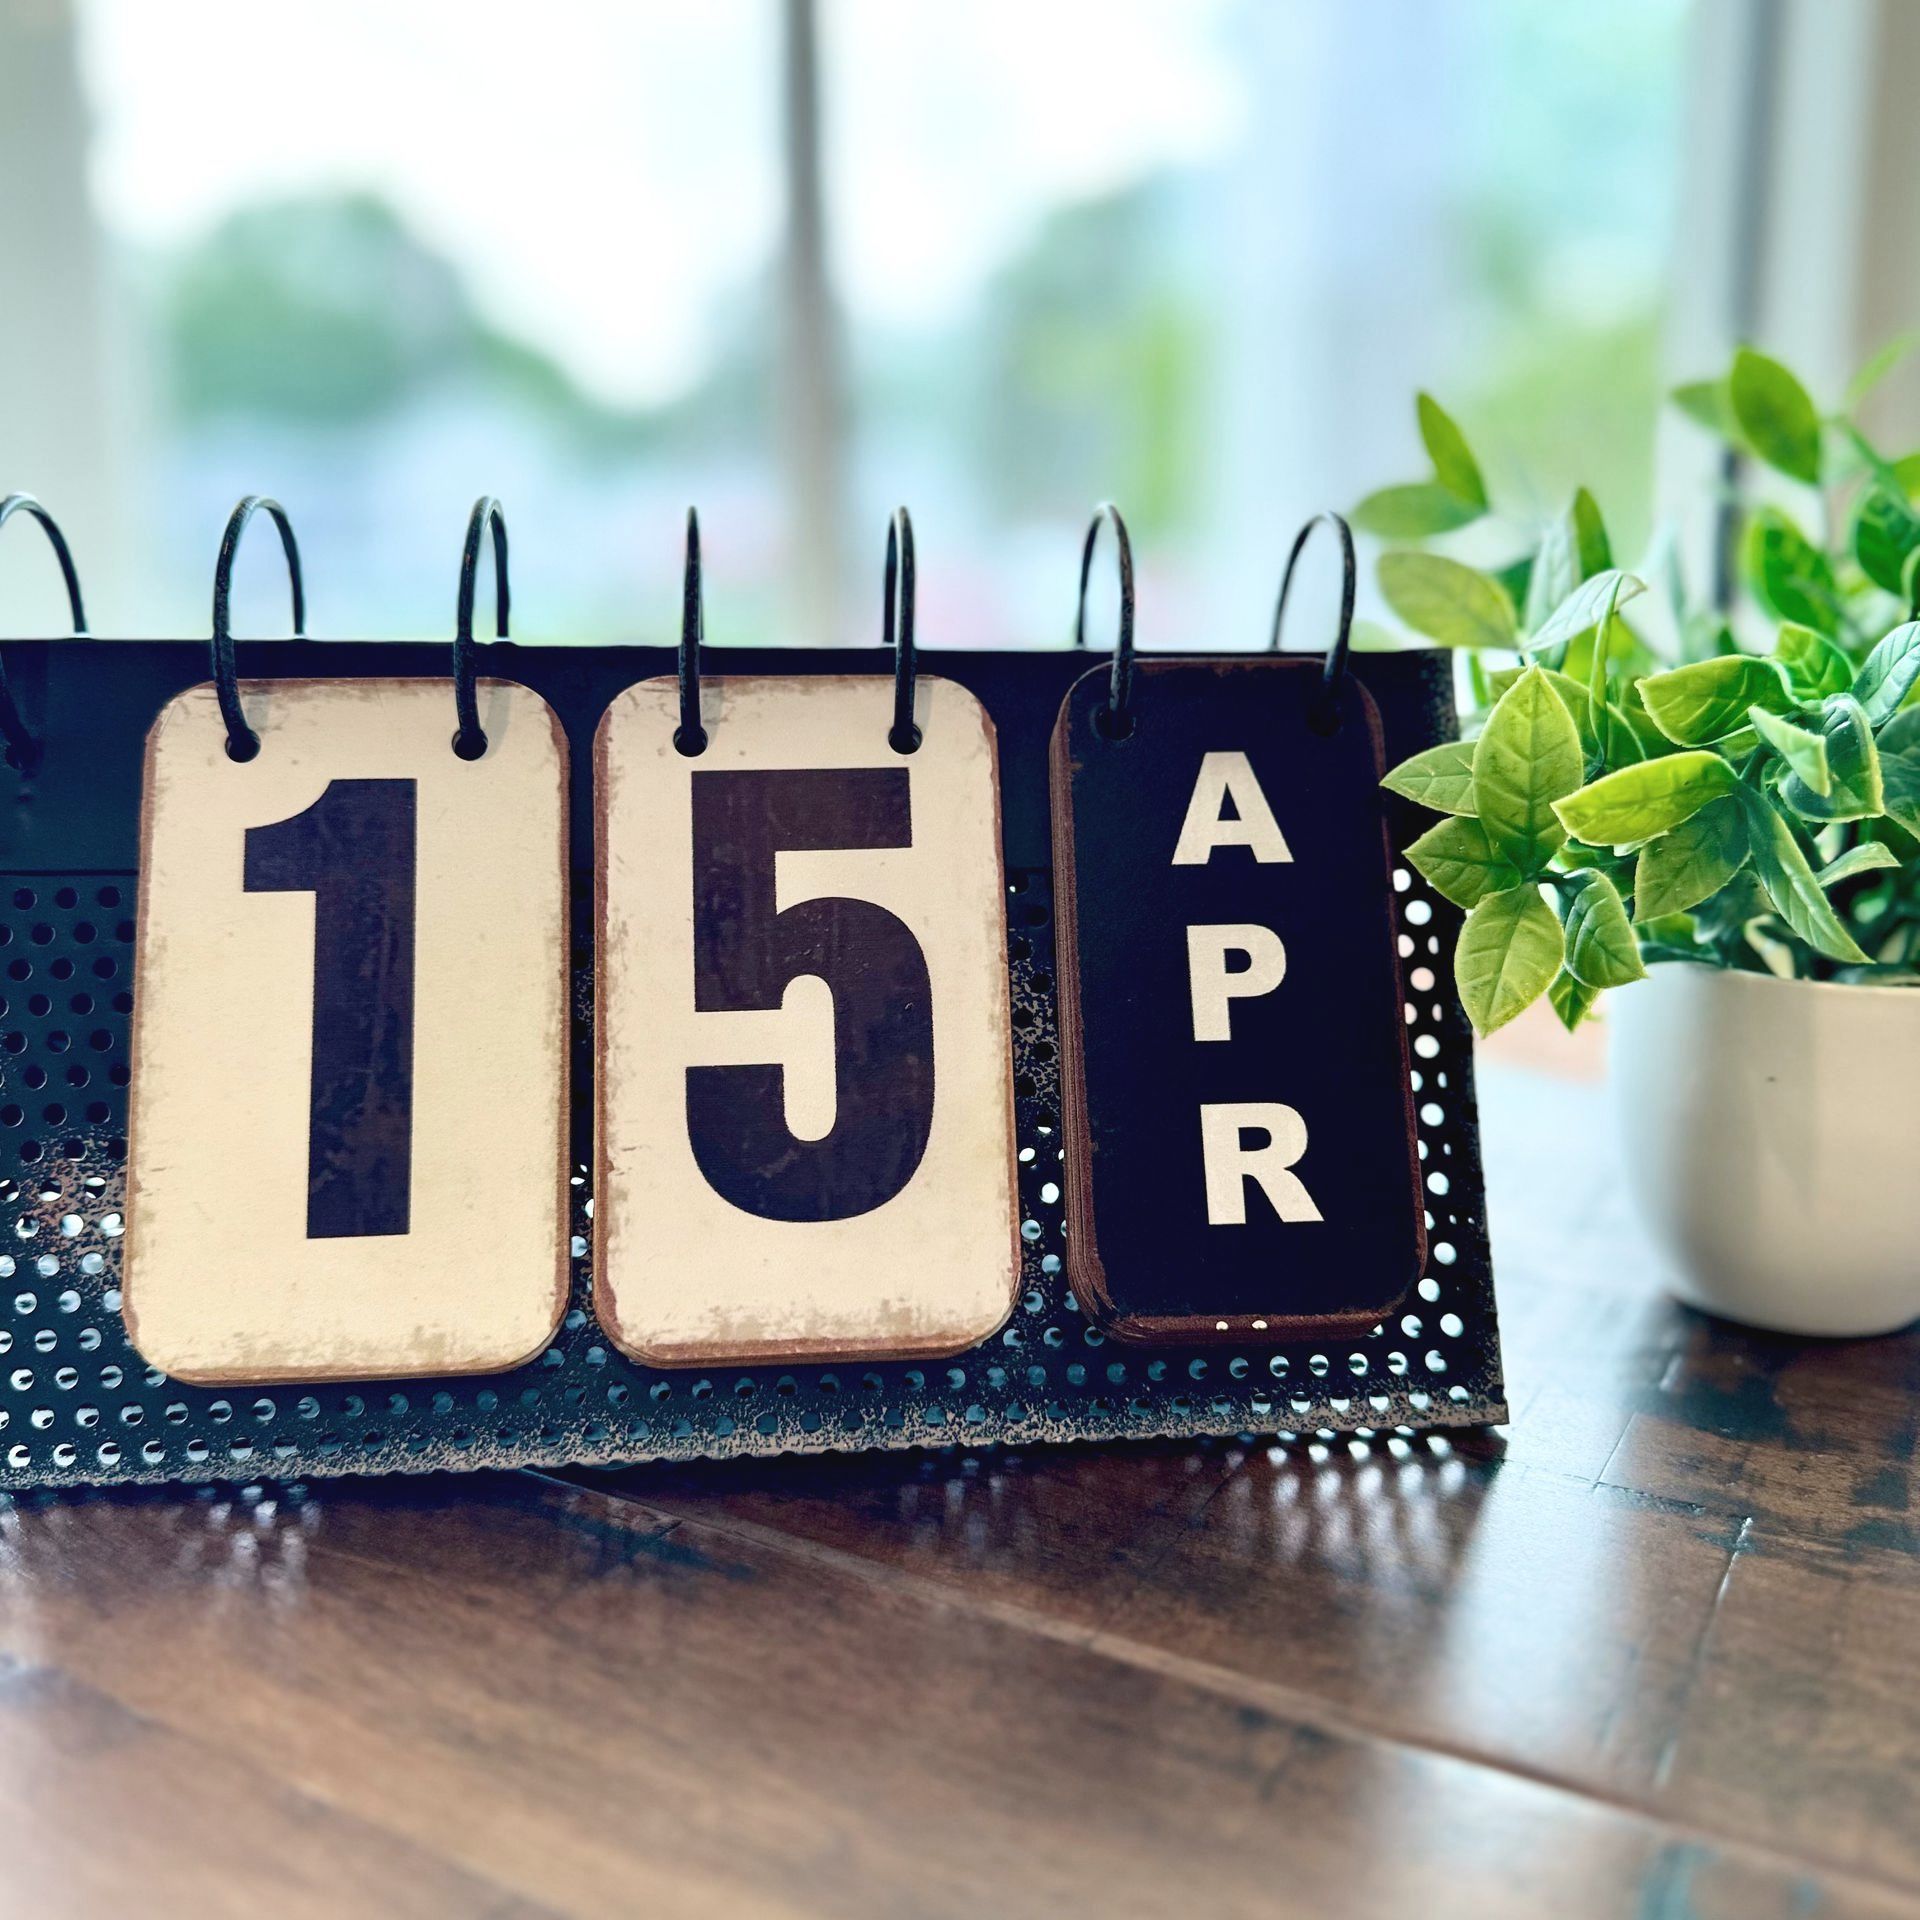 A calendar with the date of april 15 on it